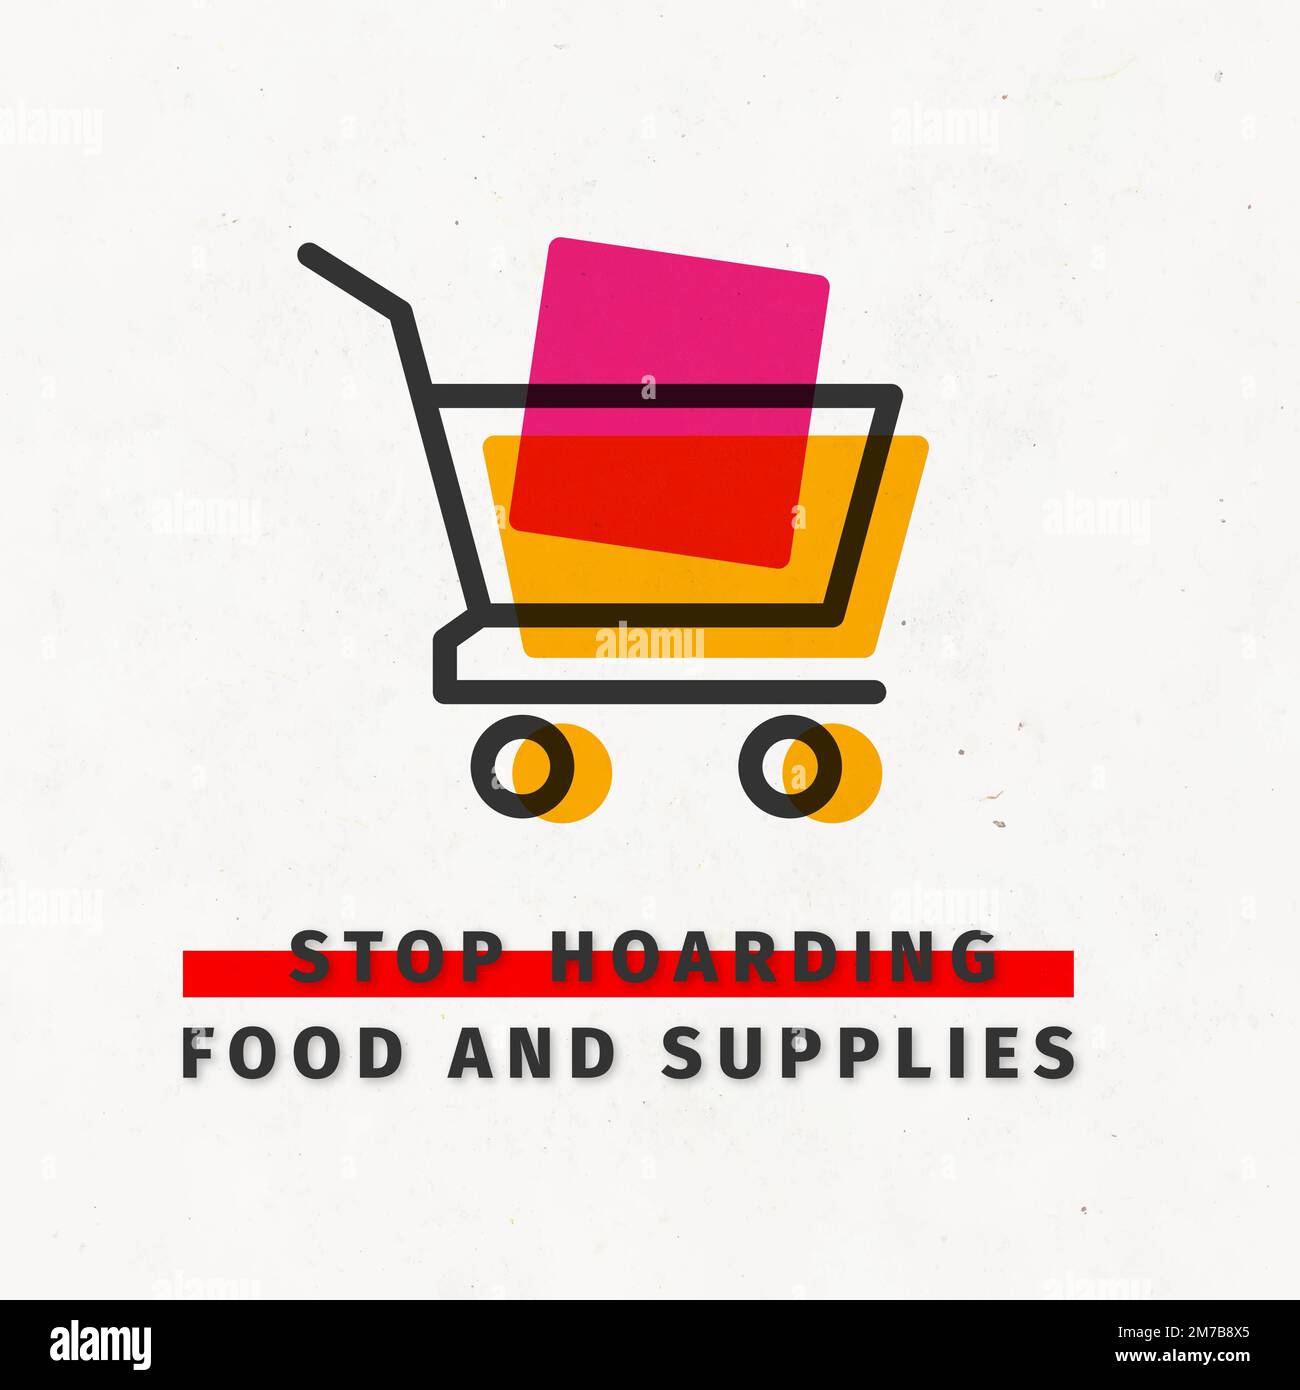 Stop hoarding food and suplies covid-19 vector Stock Vector